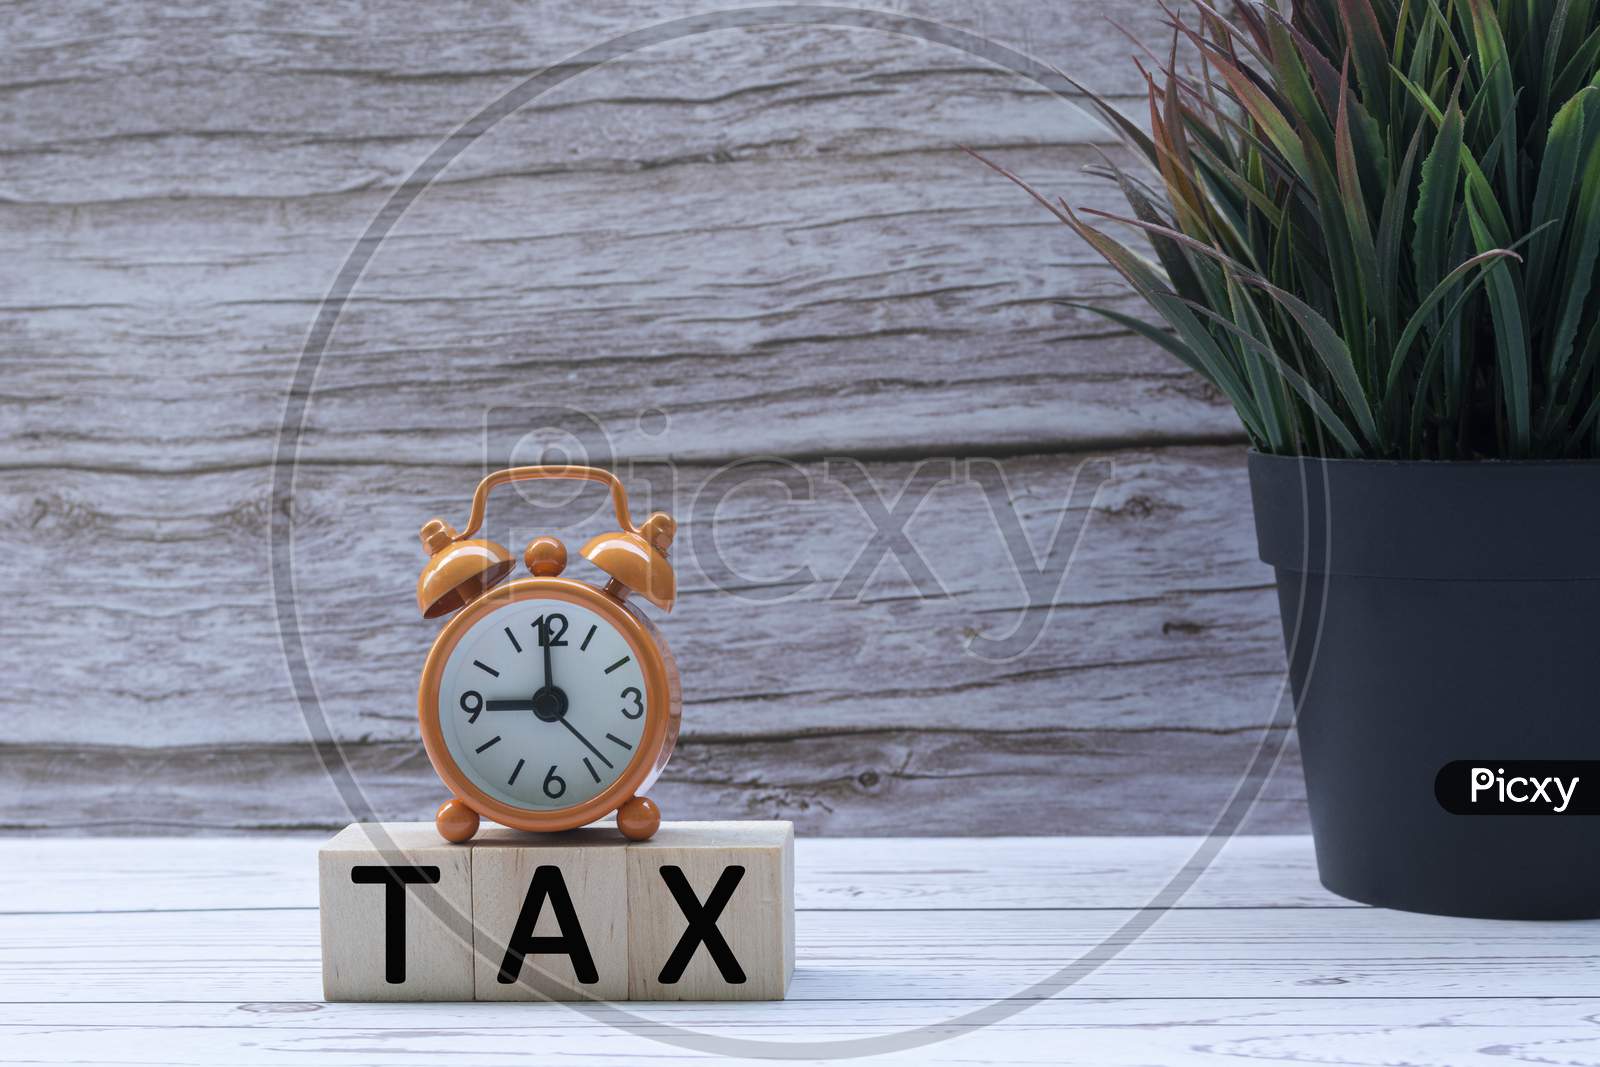 Tax Text On Wooden Block Cube With Alarm Clock And Potted Plant